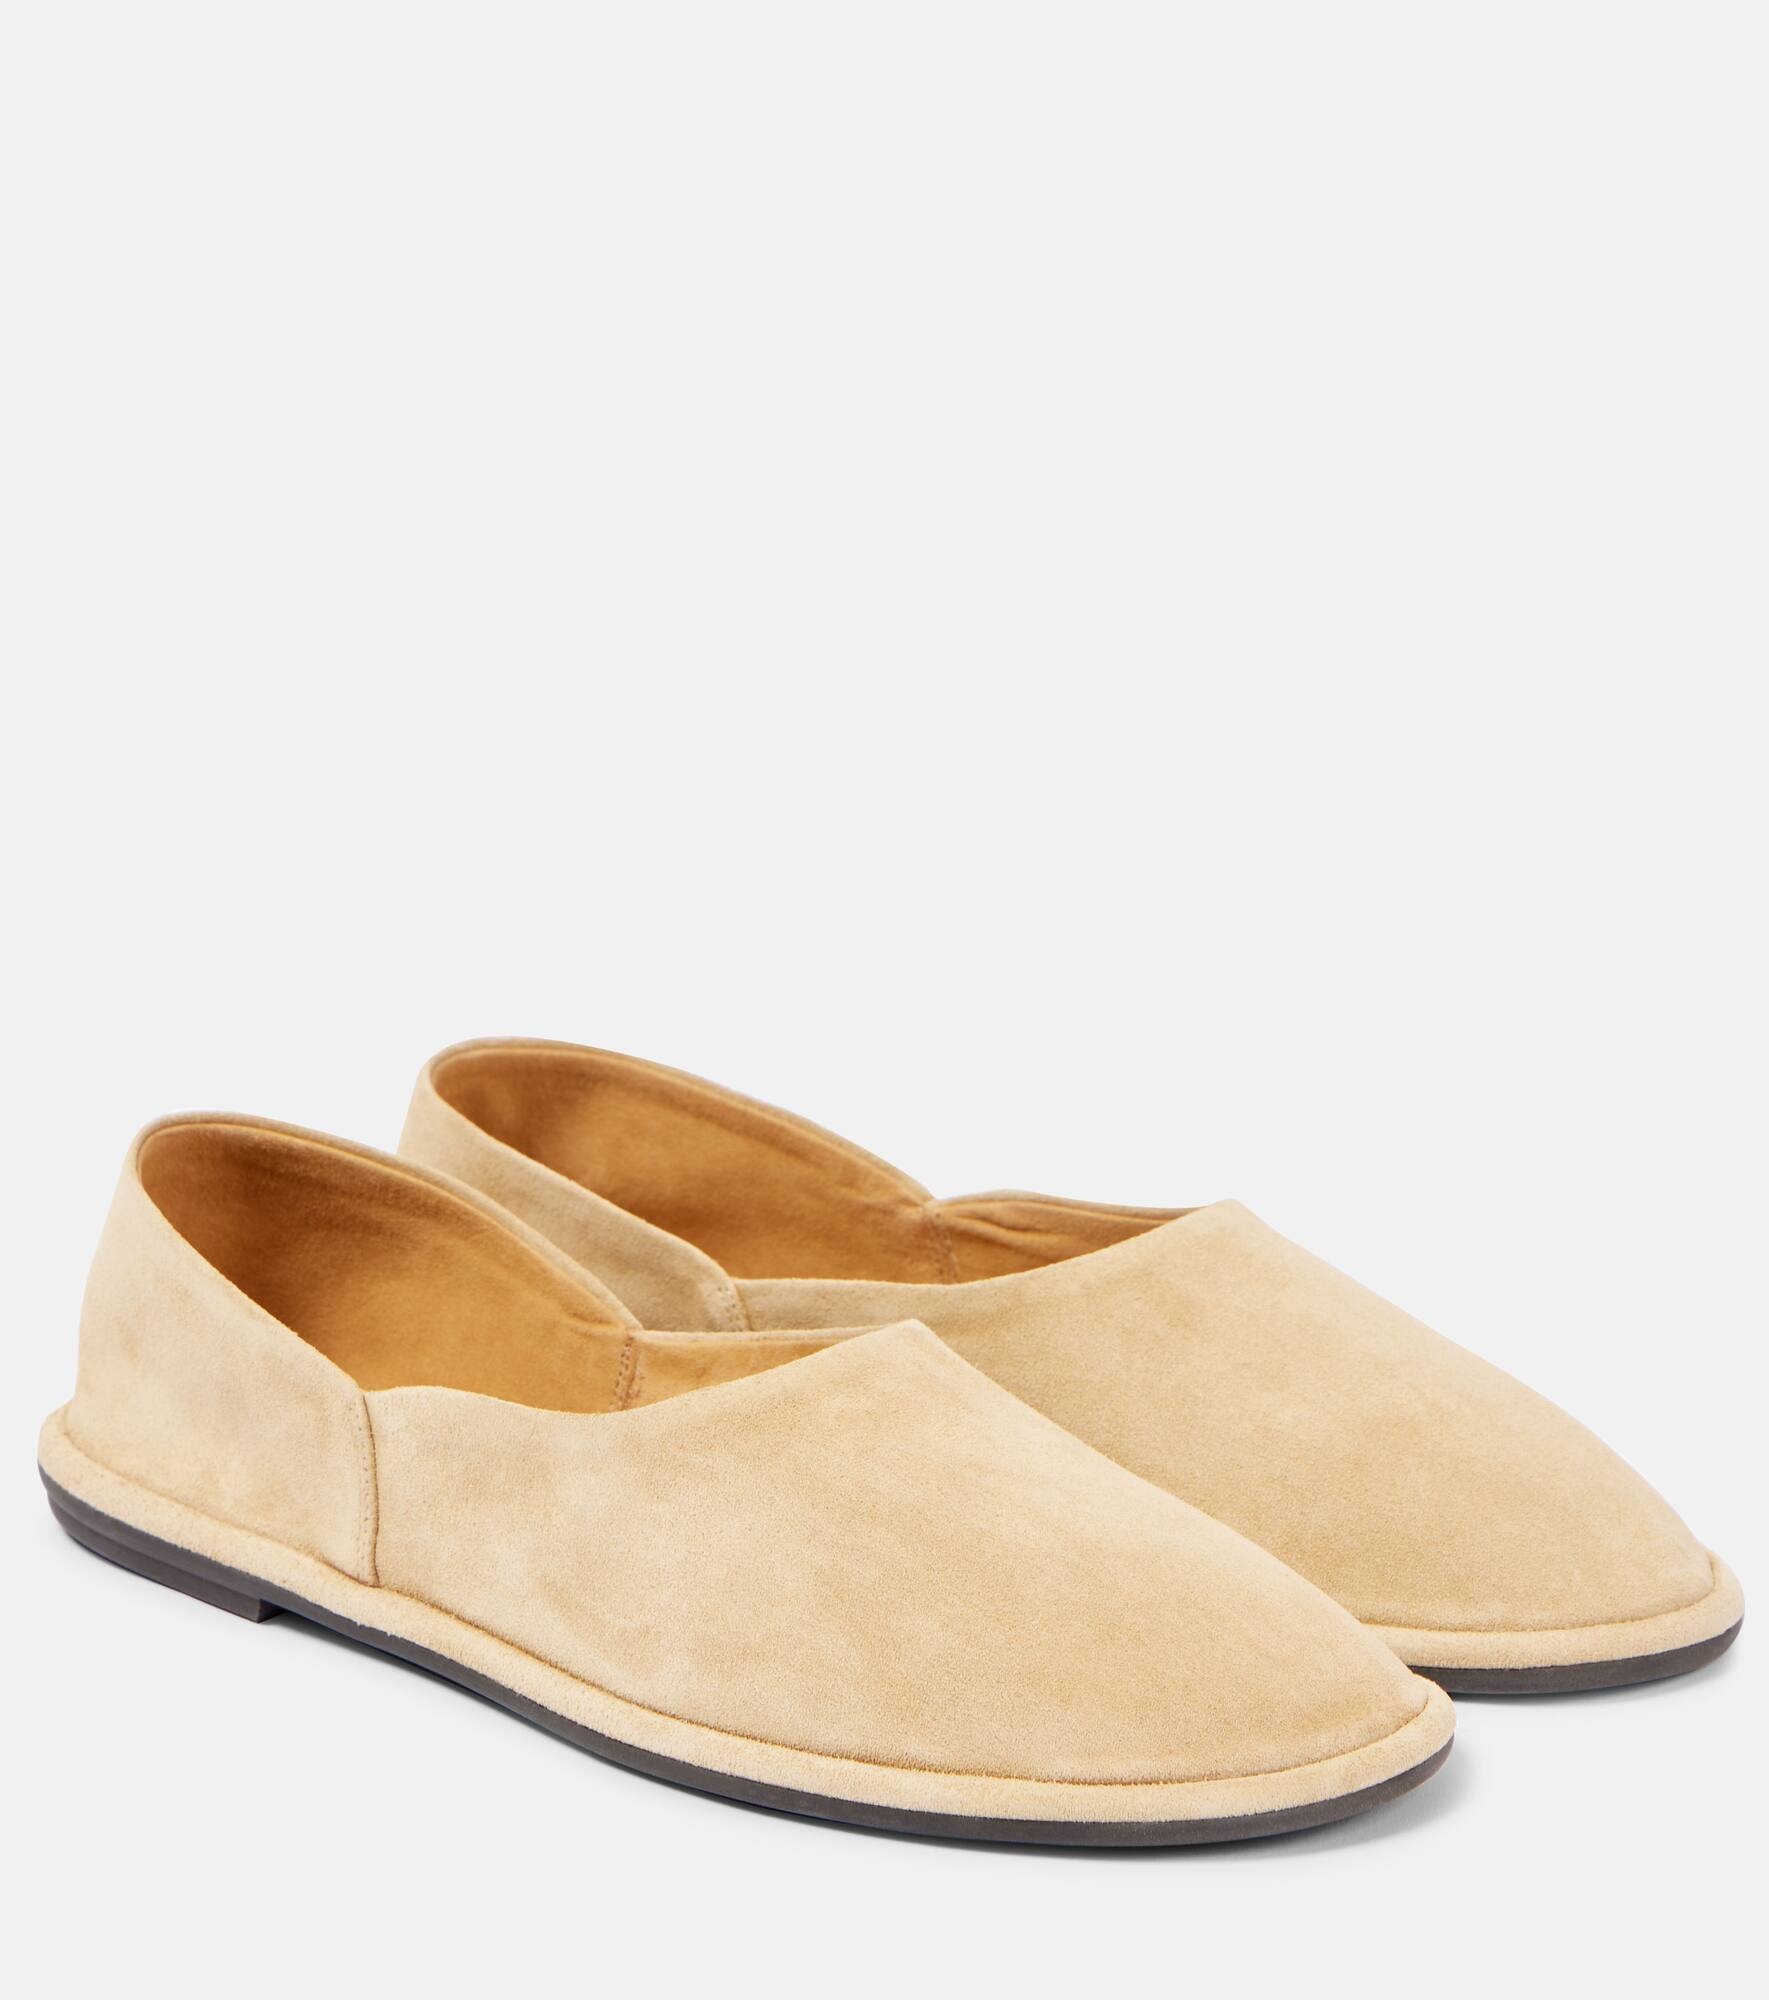 Canal suede slip-on shoes - 1